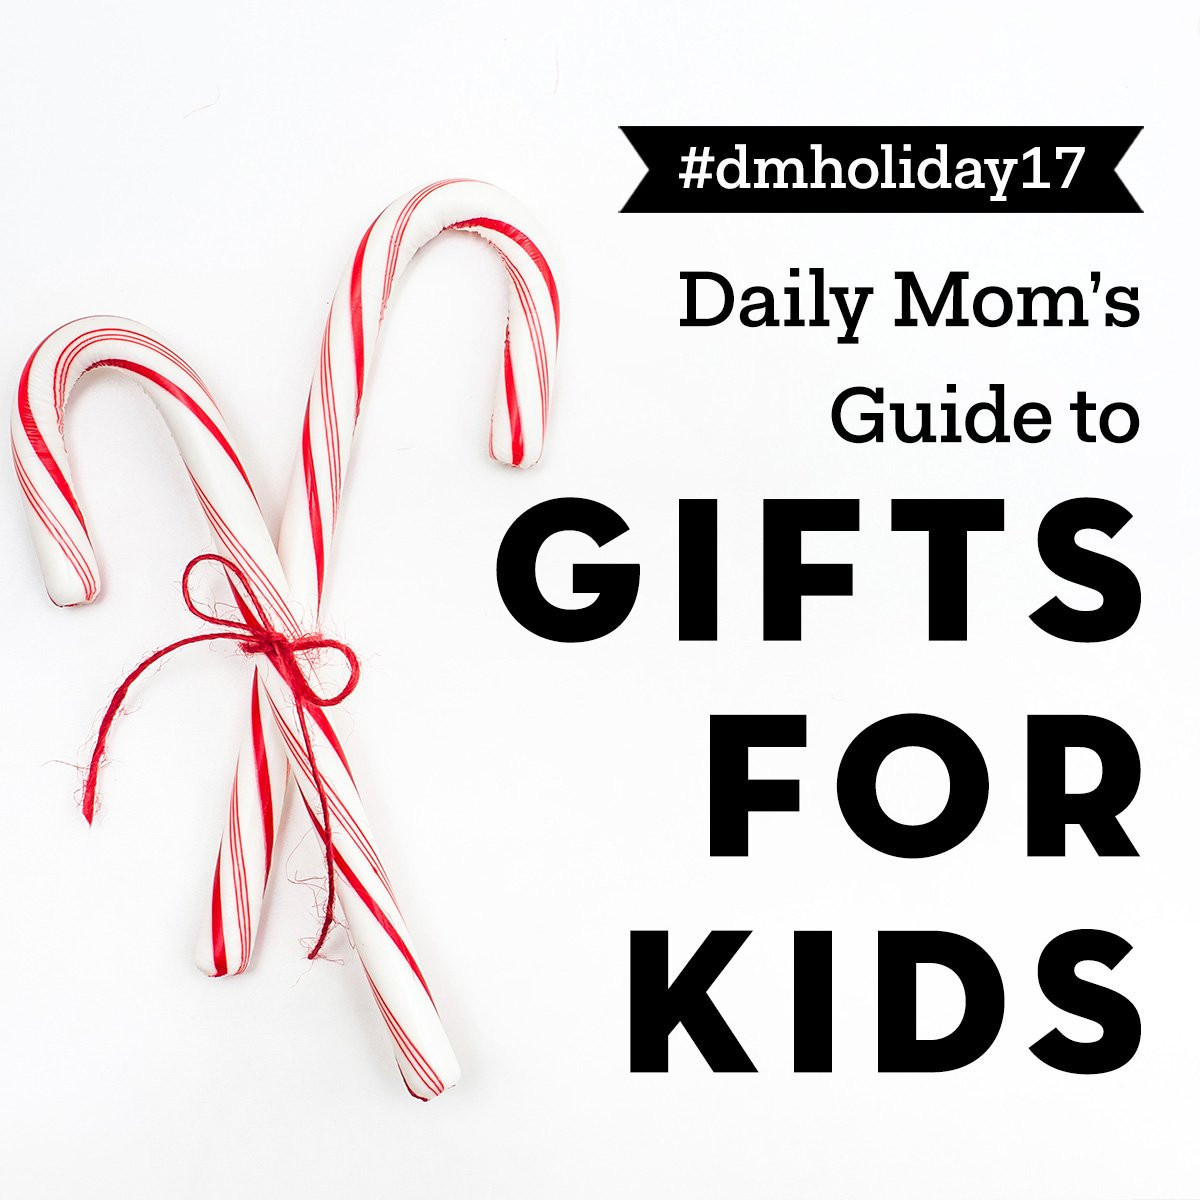 Practical Gifts For Kids
 Daily Mom’s Guide To The Ultimate Practical Gift Daily Mom